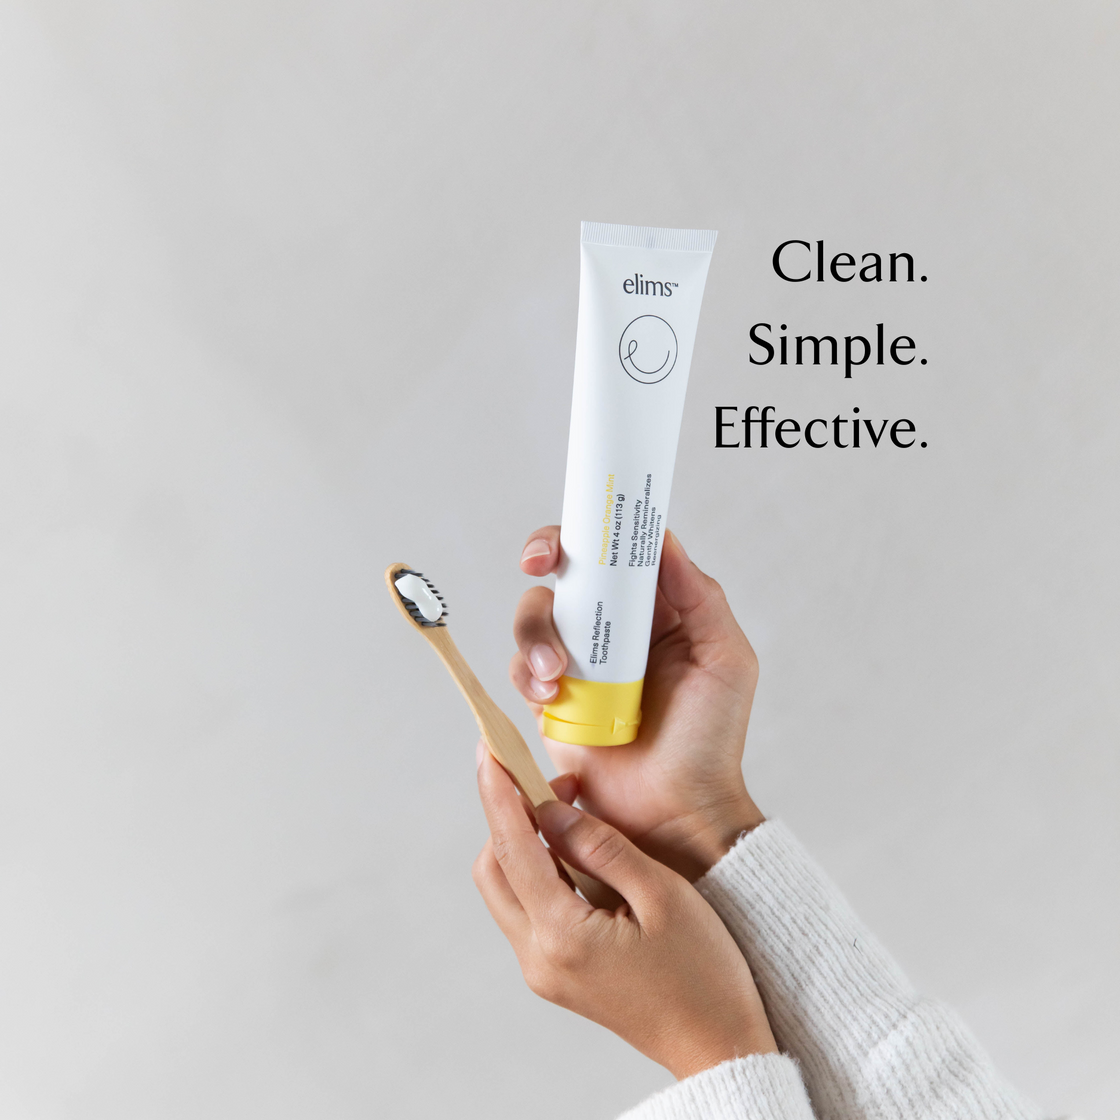 clean simple and effective ingredients used in elims oral care's toothpaste